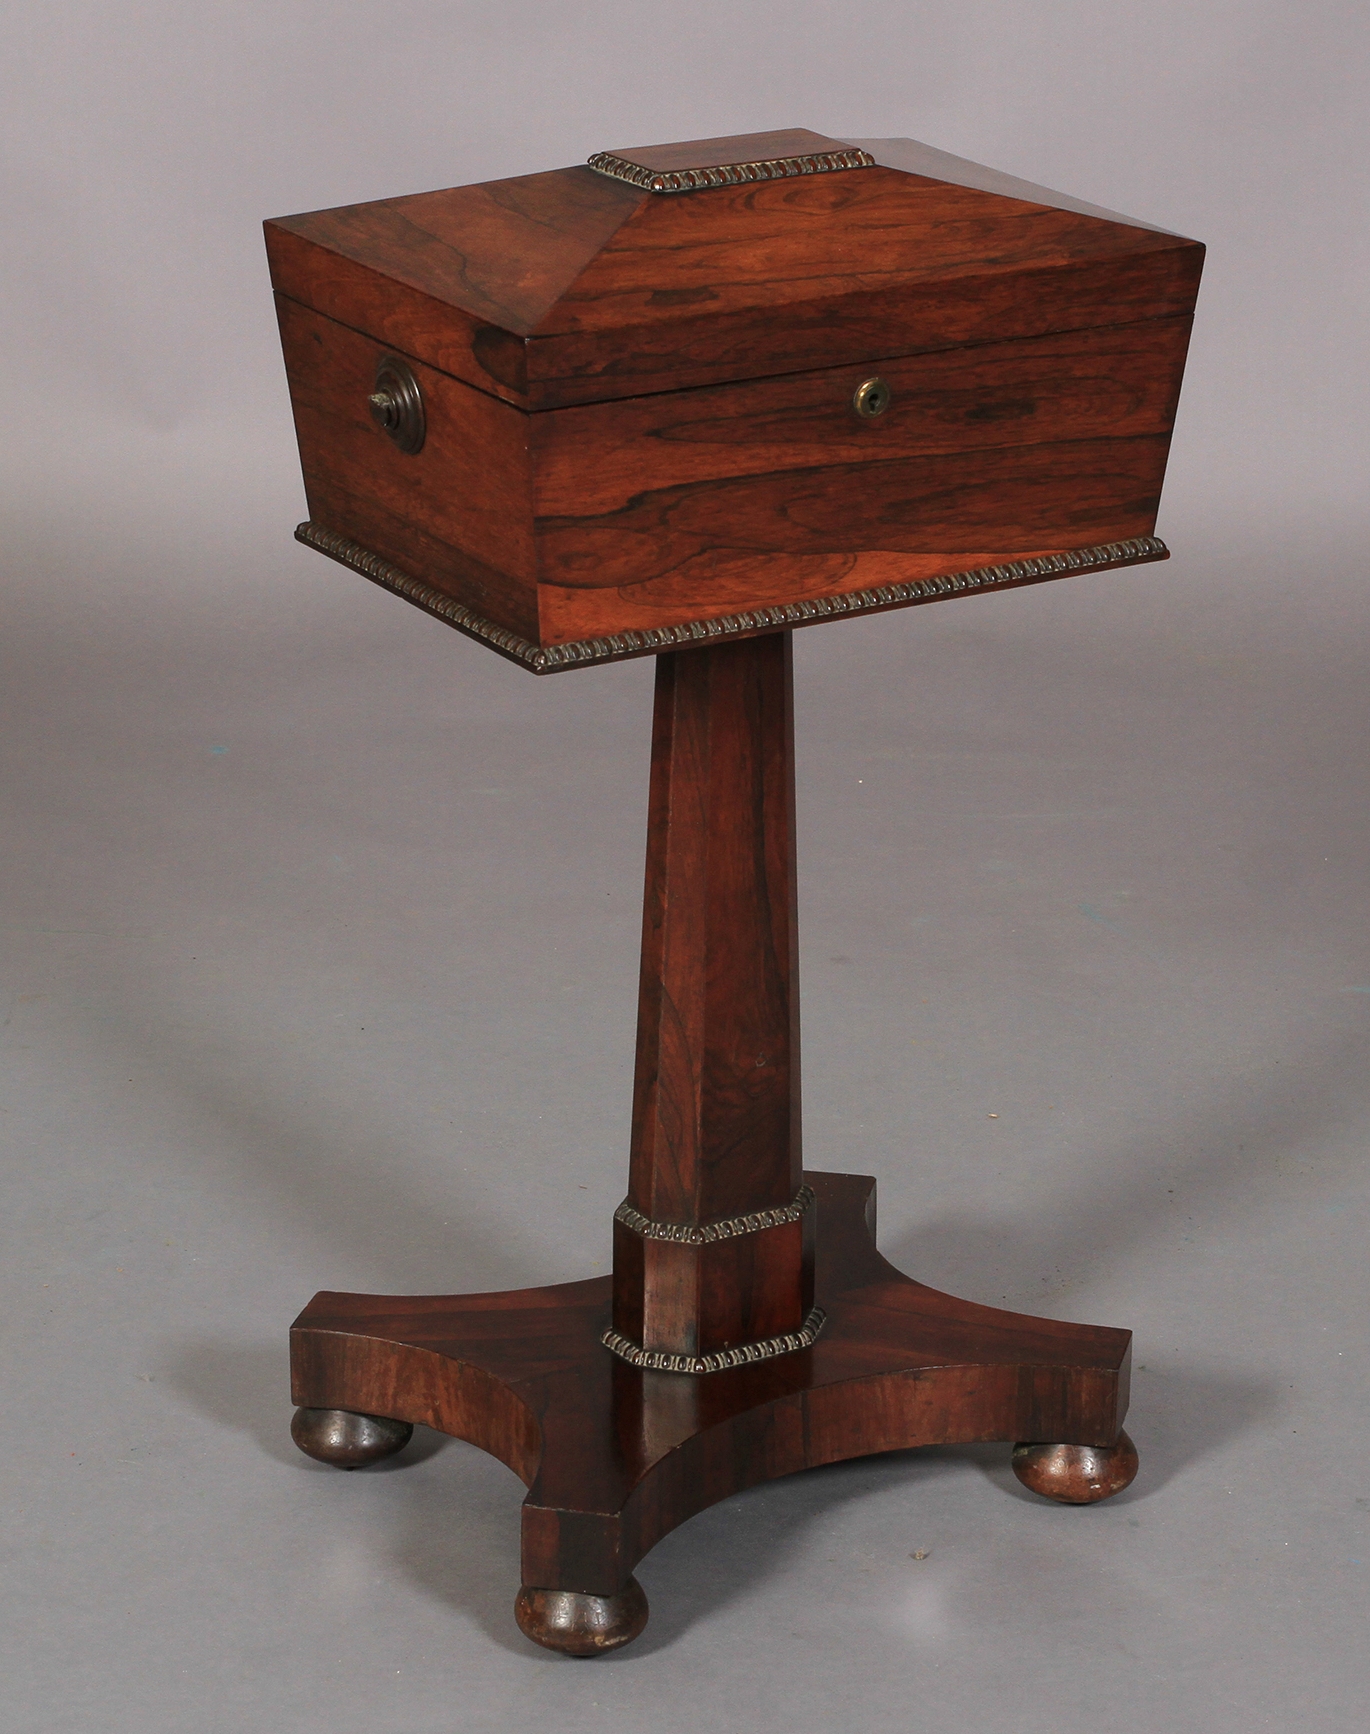 A REGENCY ROSEWOOD VENEERED TEAPOY of conventional form, the sarcophagus shaped top with reel